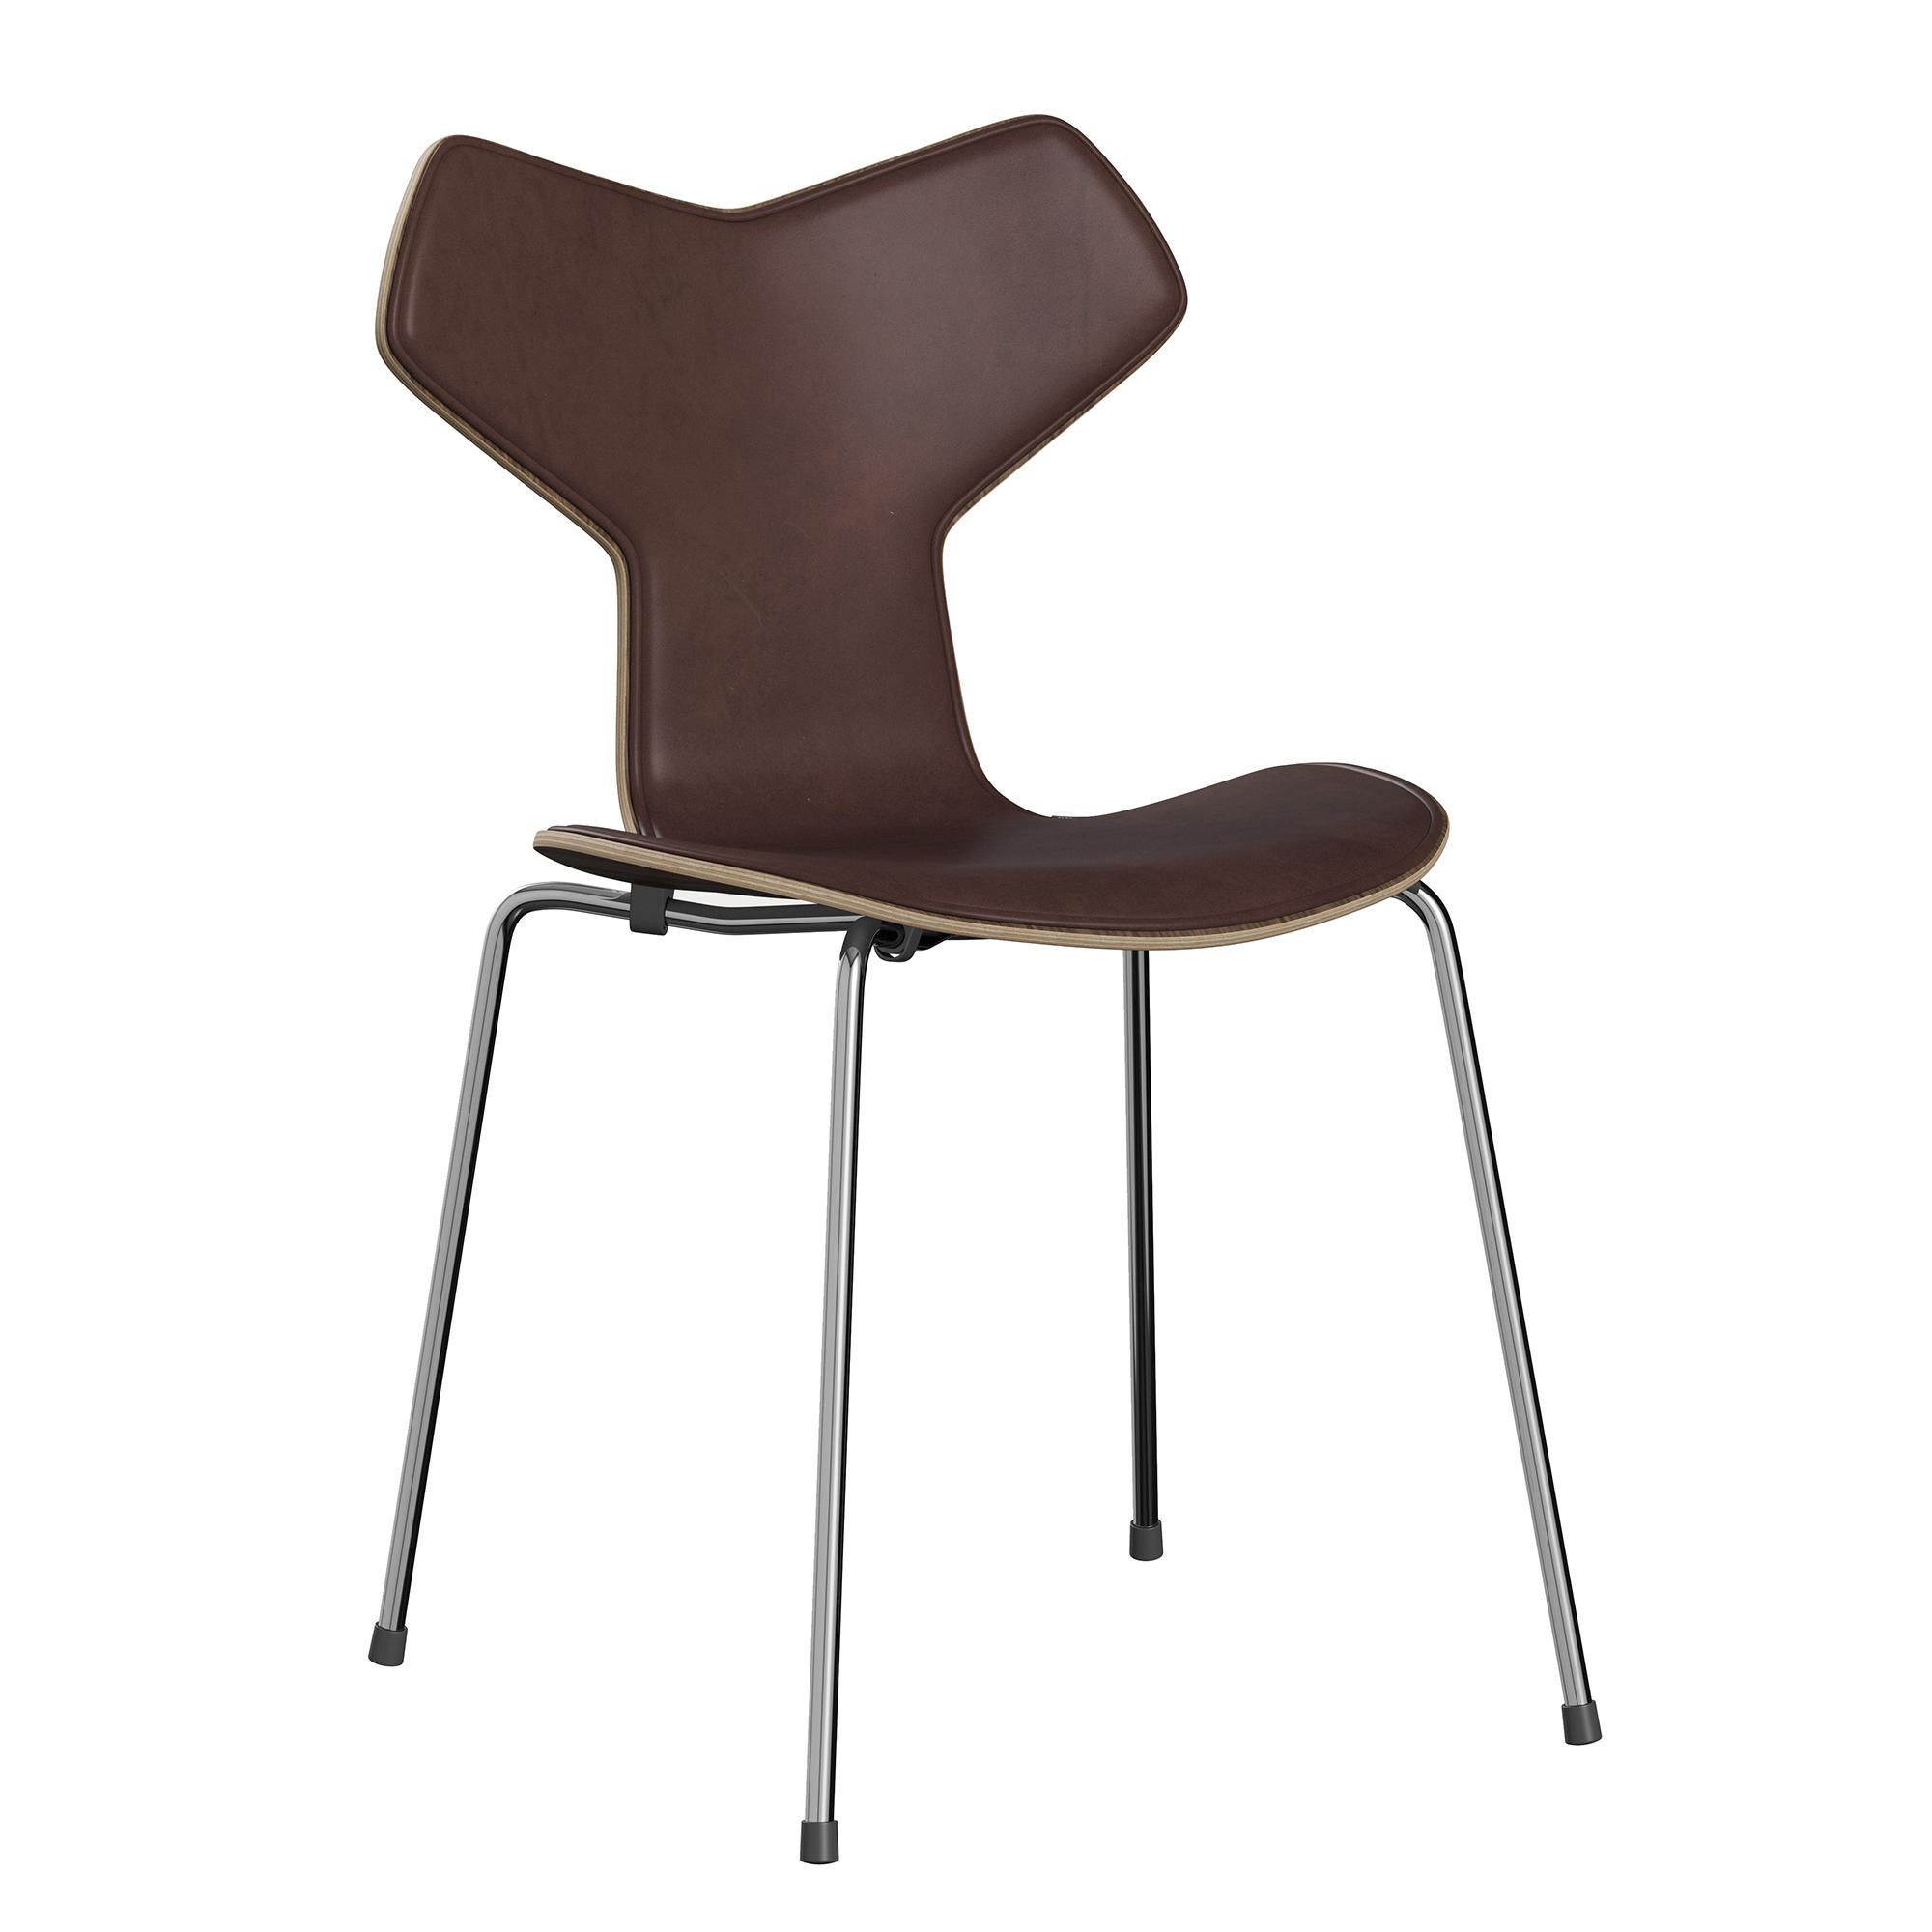 Arne Jacobsen 'Grand Prix' Chair for Fritz Hansen in Partial Leather Upholstery For Sale 2